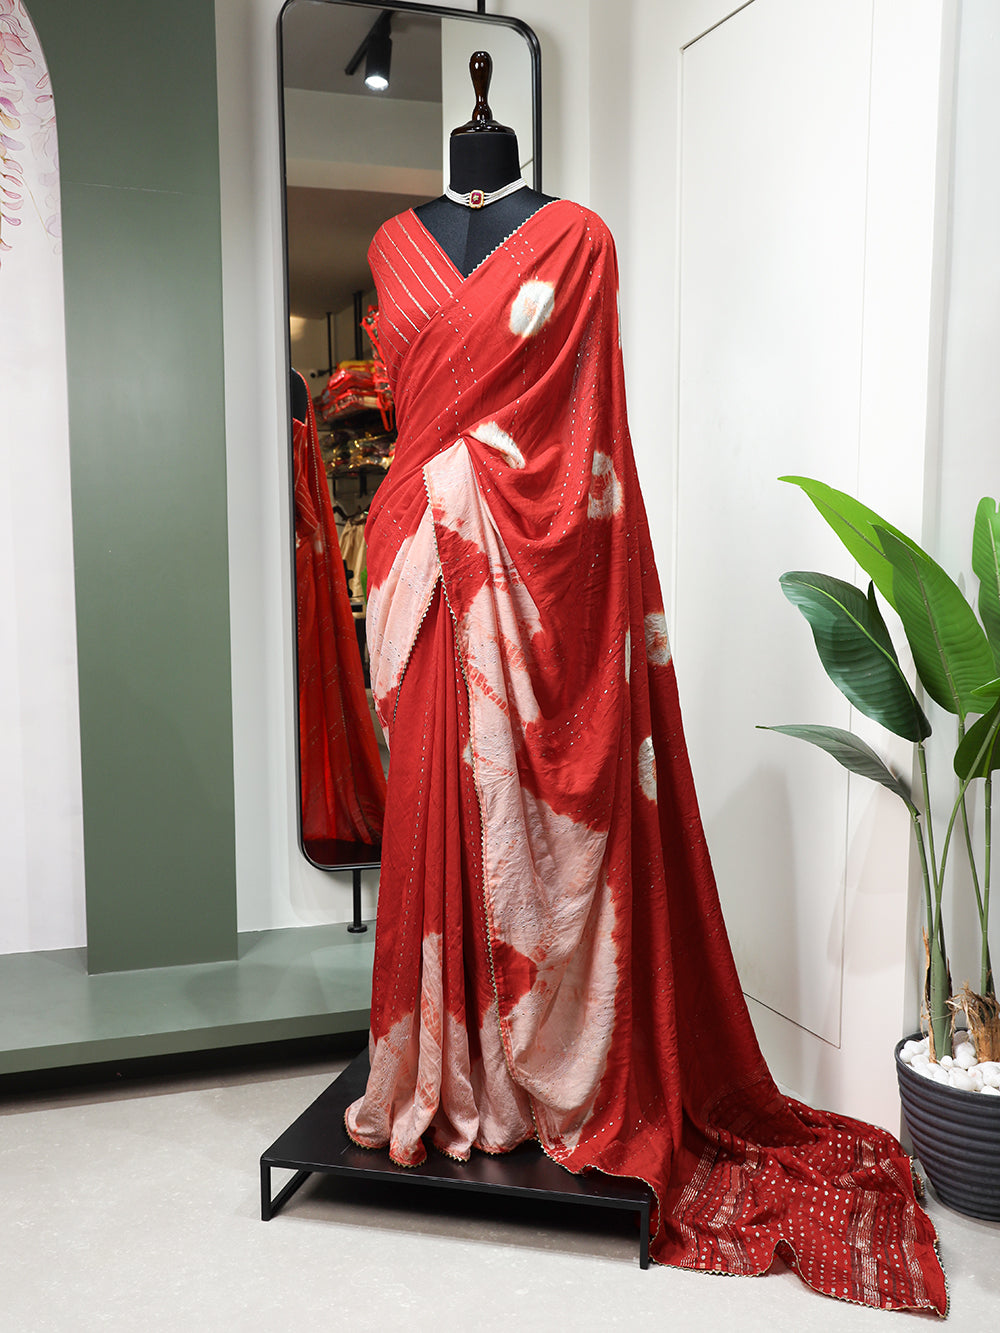 Find Amazing Bandhani and Shibori Sarees at Affordable Prices – The Thread  Weavers